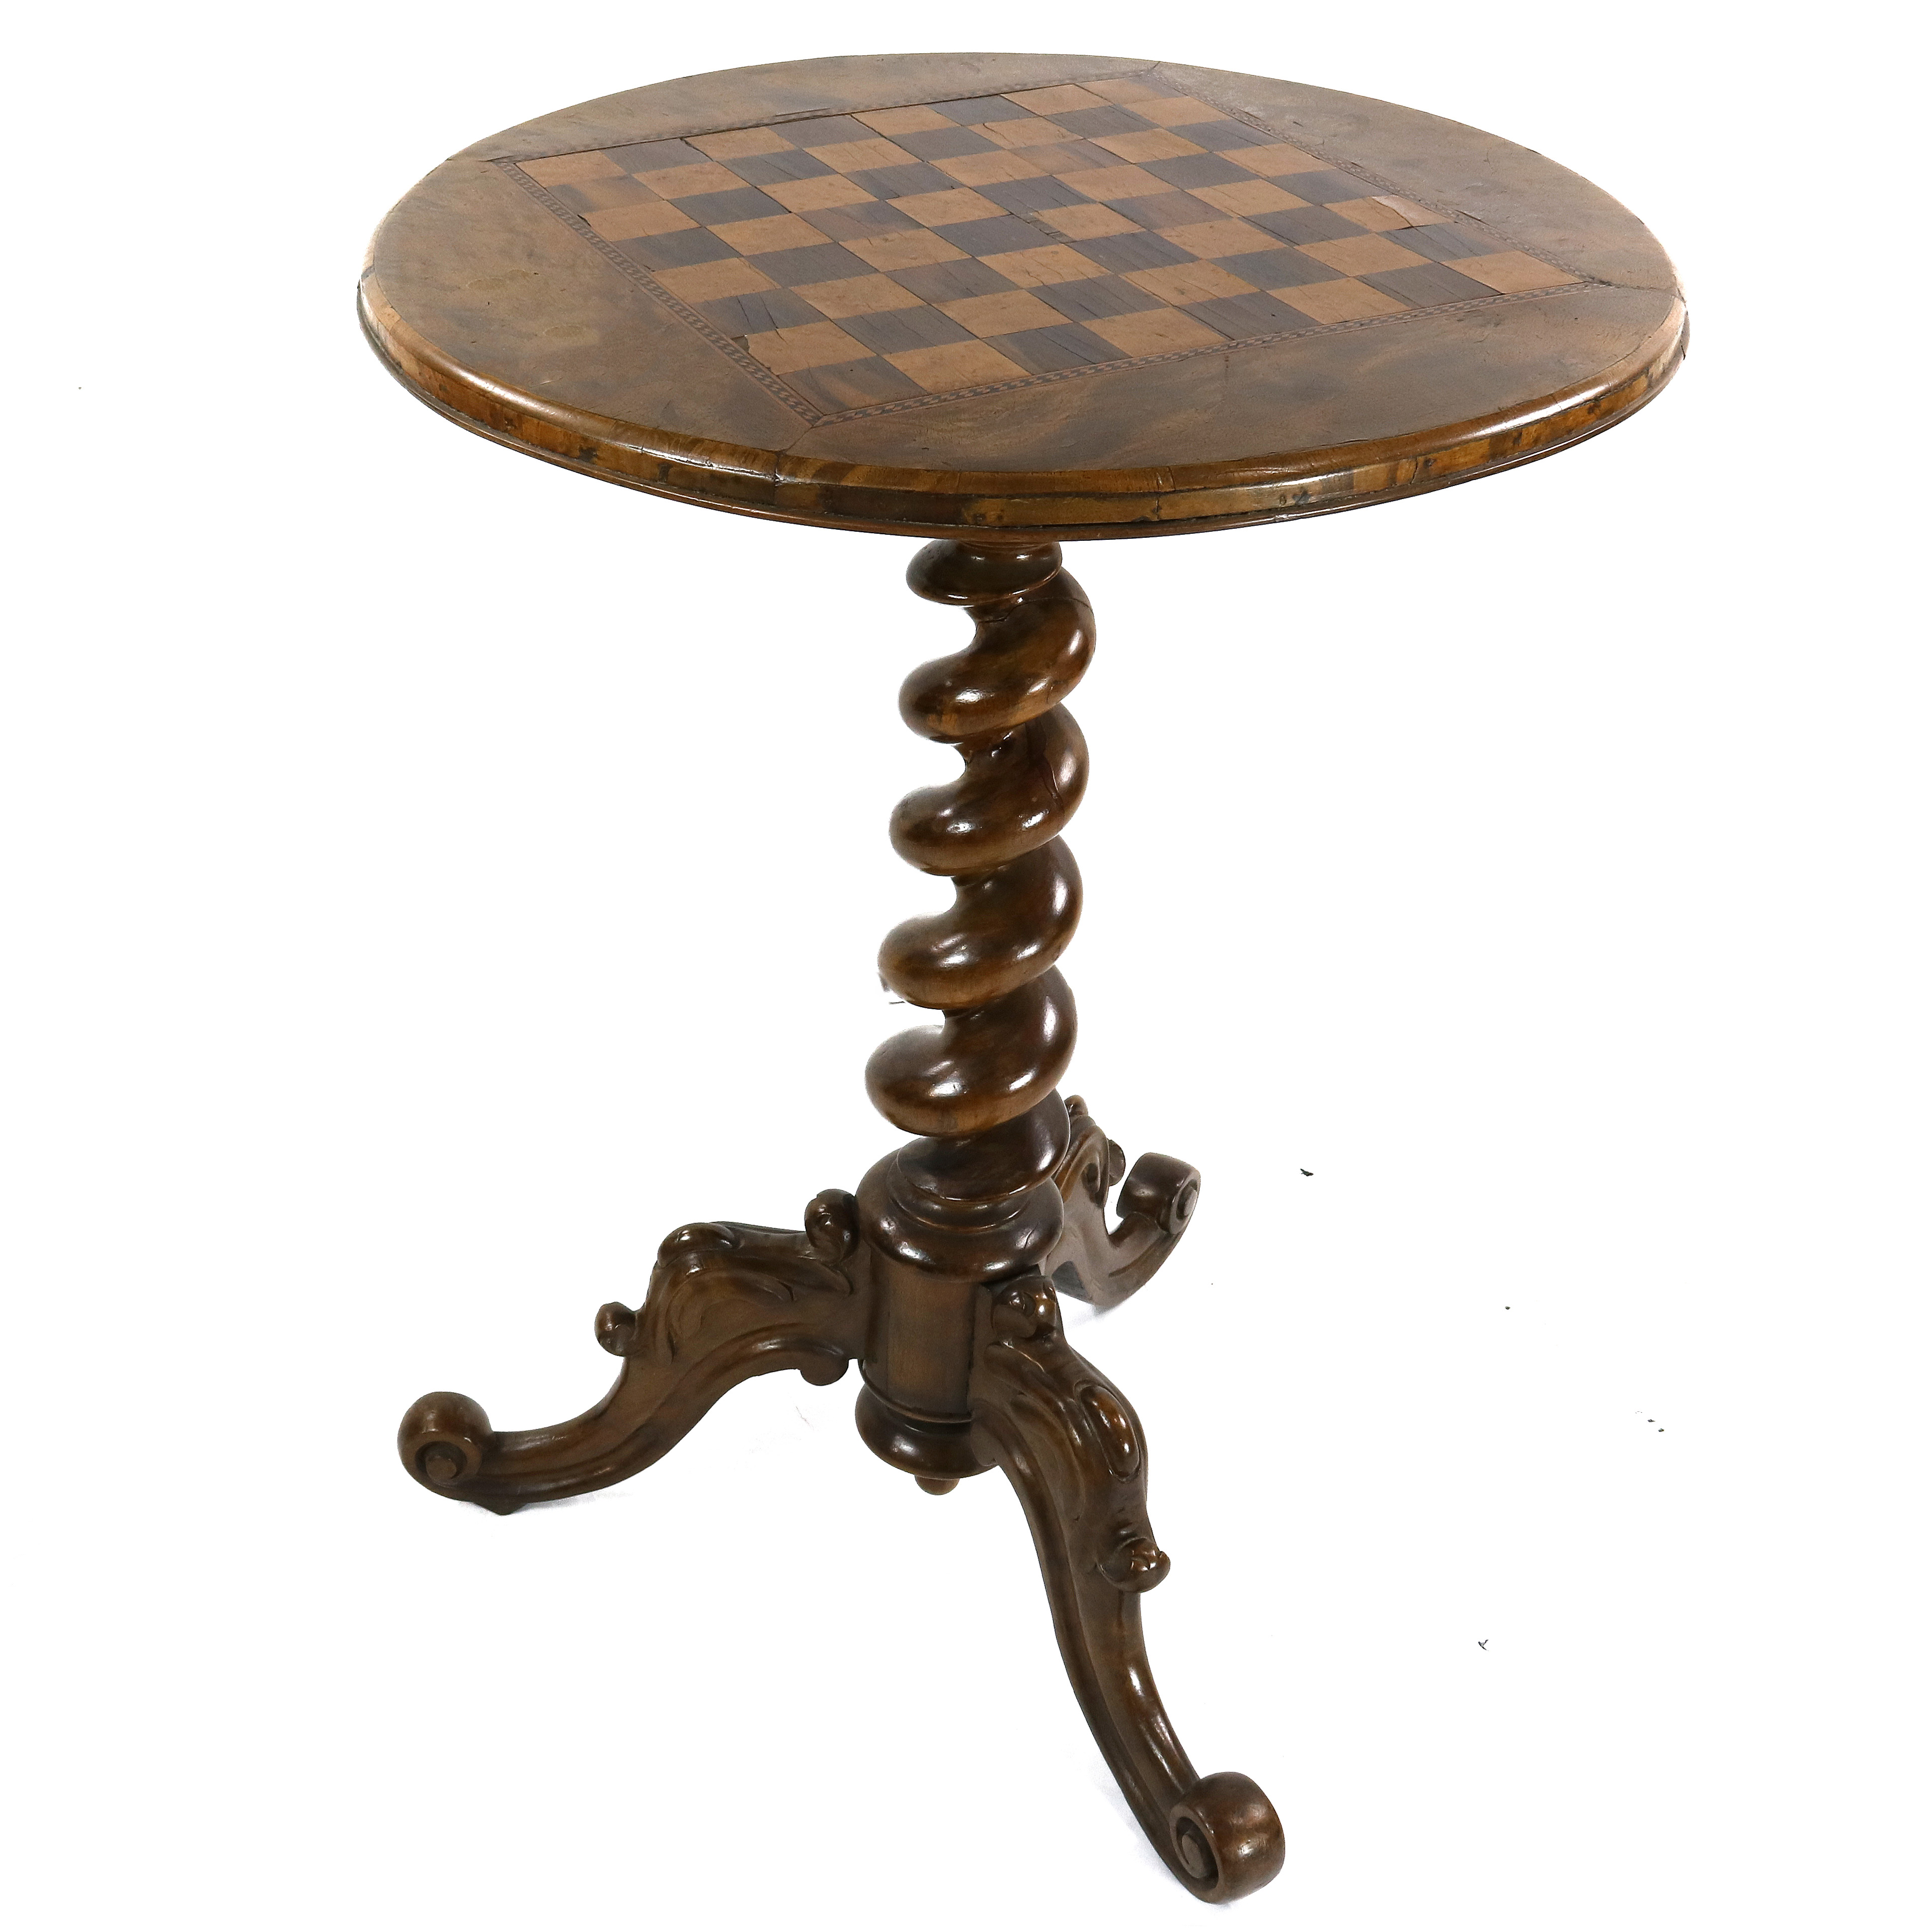 A CONTINETAL INLAID GAMES TABLE 3a5761